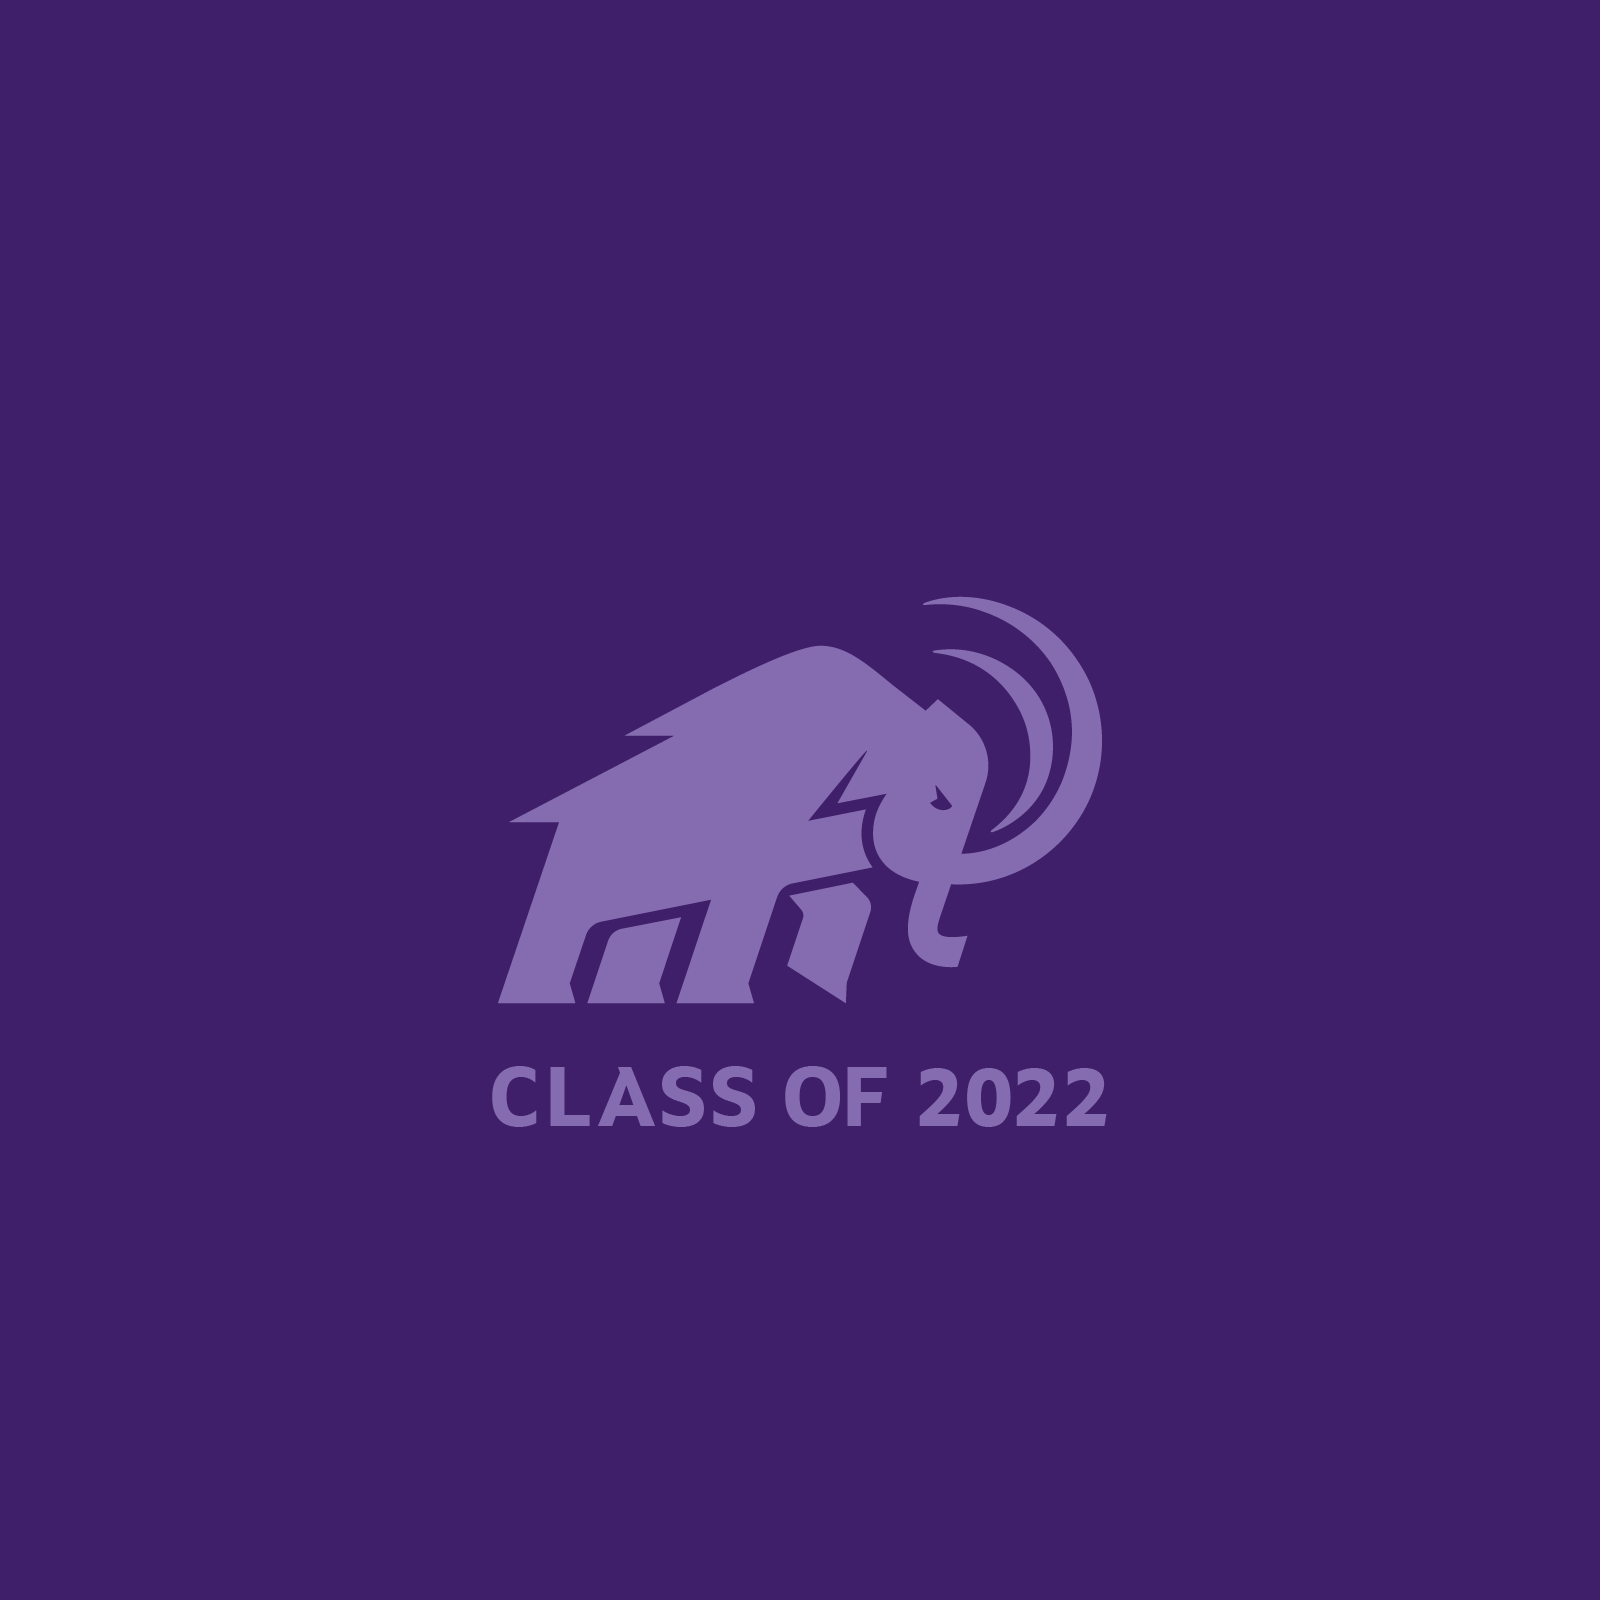 Phone Wallpapers for the Class of 2022 Wallpapers for the Class